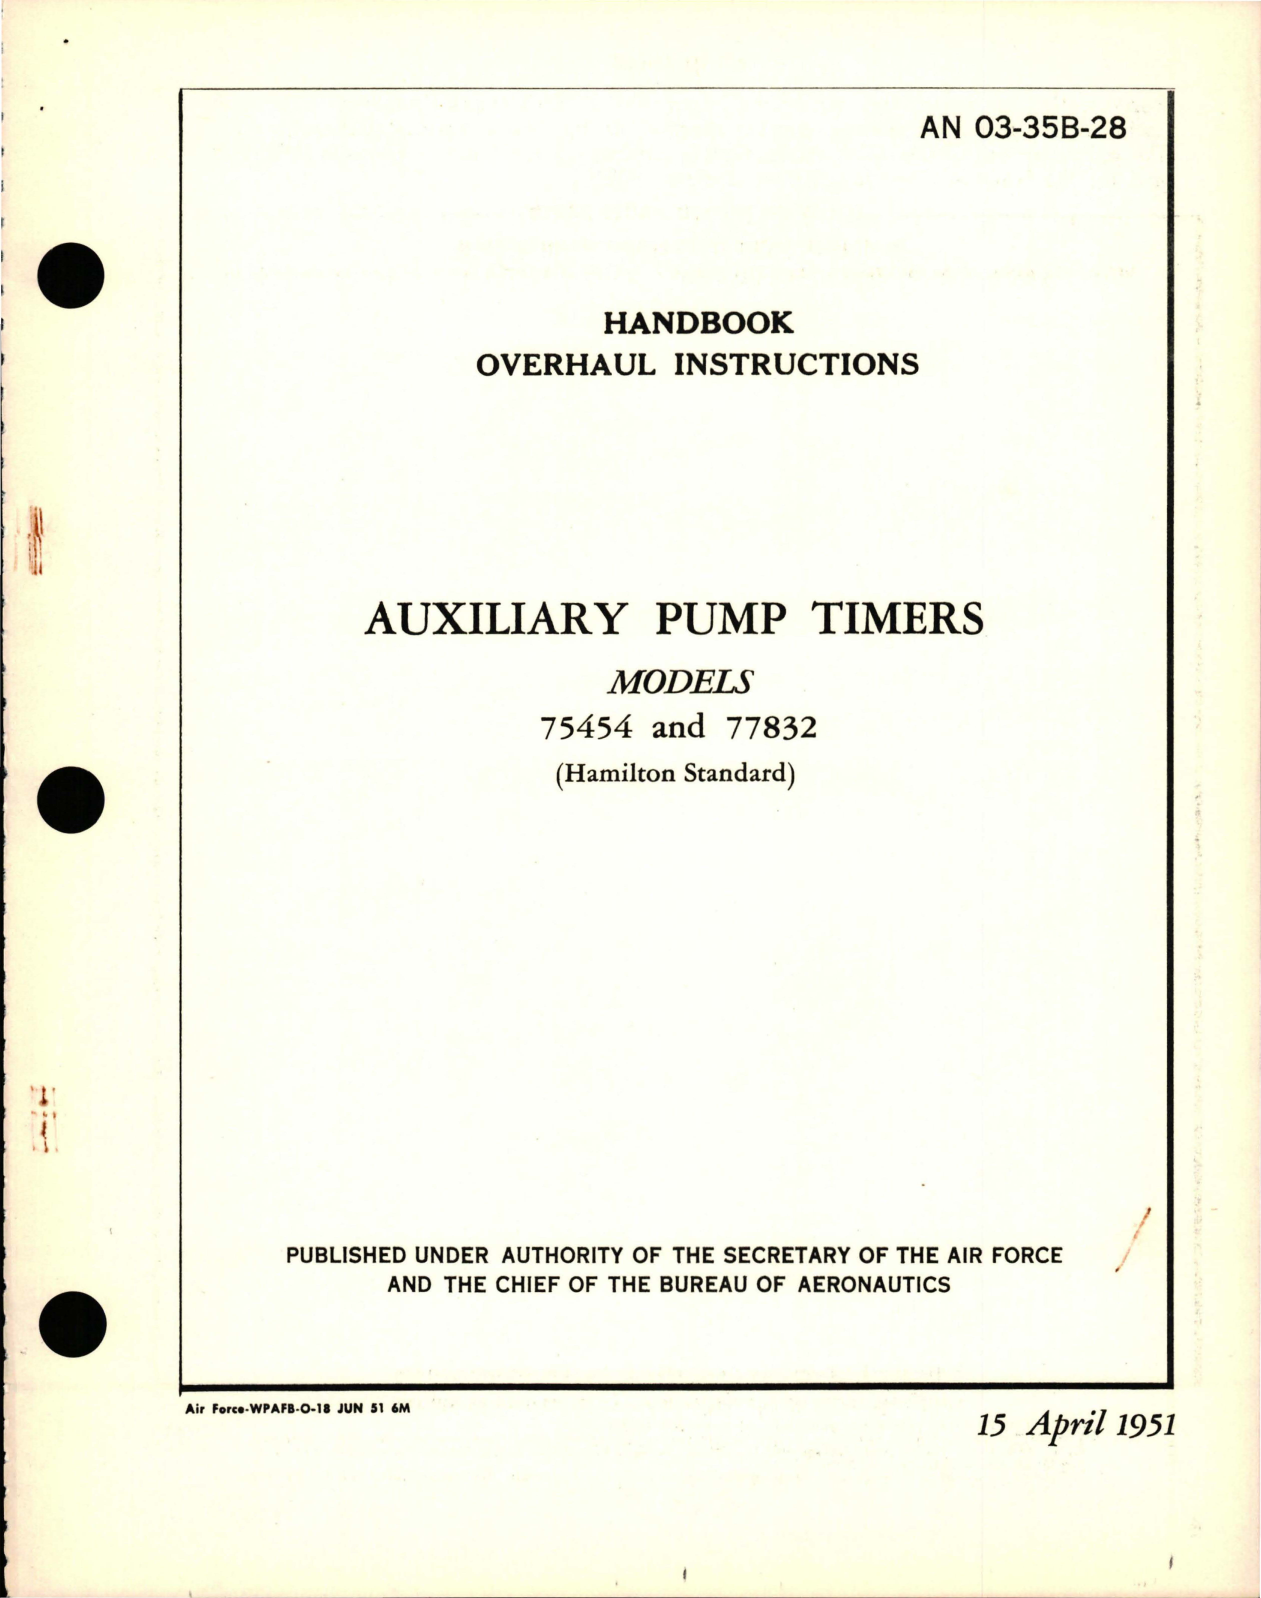 Sample page 1 from AirCorps Library document: Overhaul Instructions for Auxiliary Pump Timers - Models 75454 and 77832 